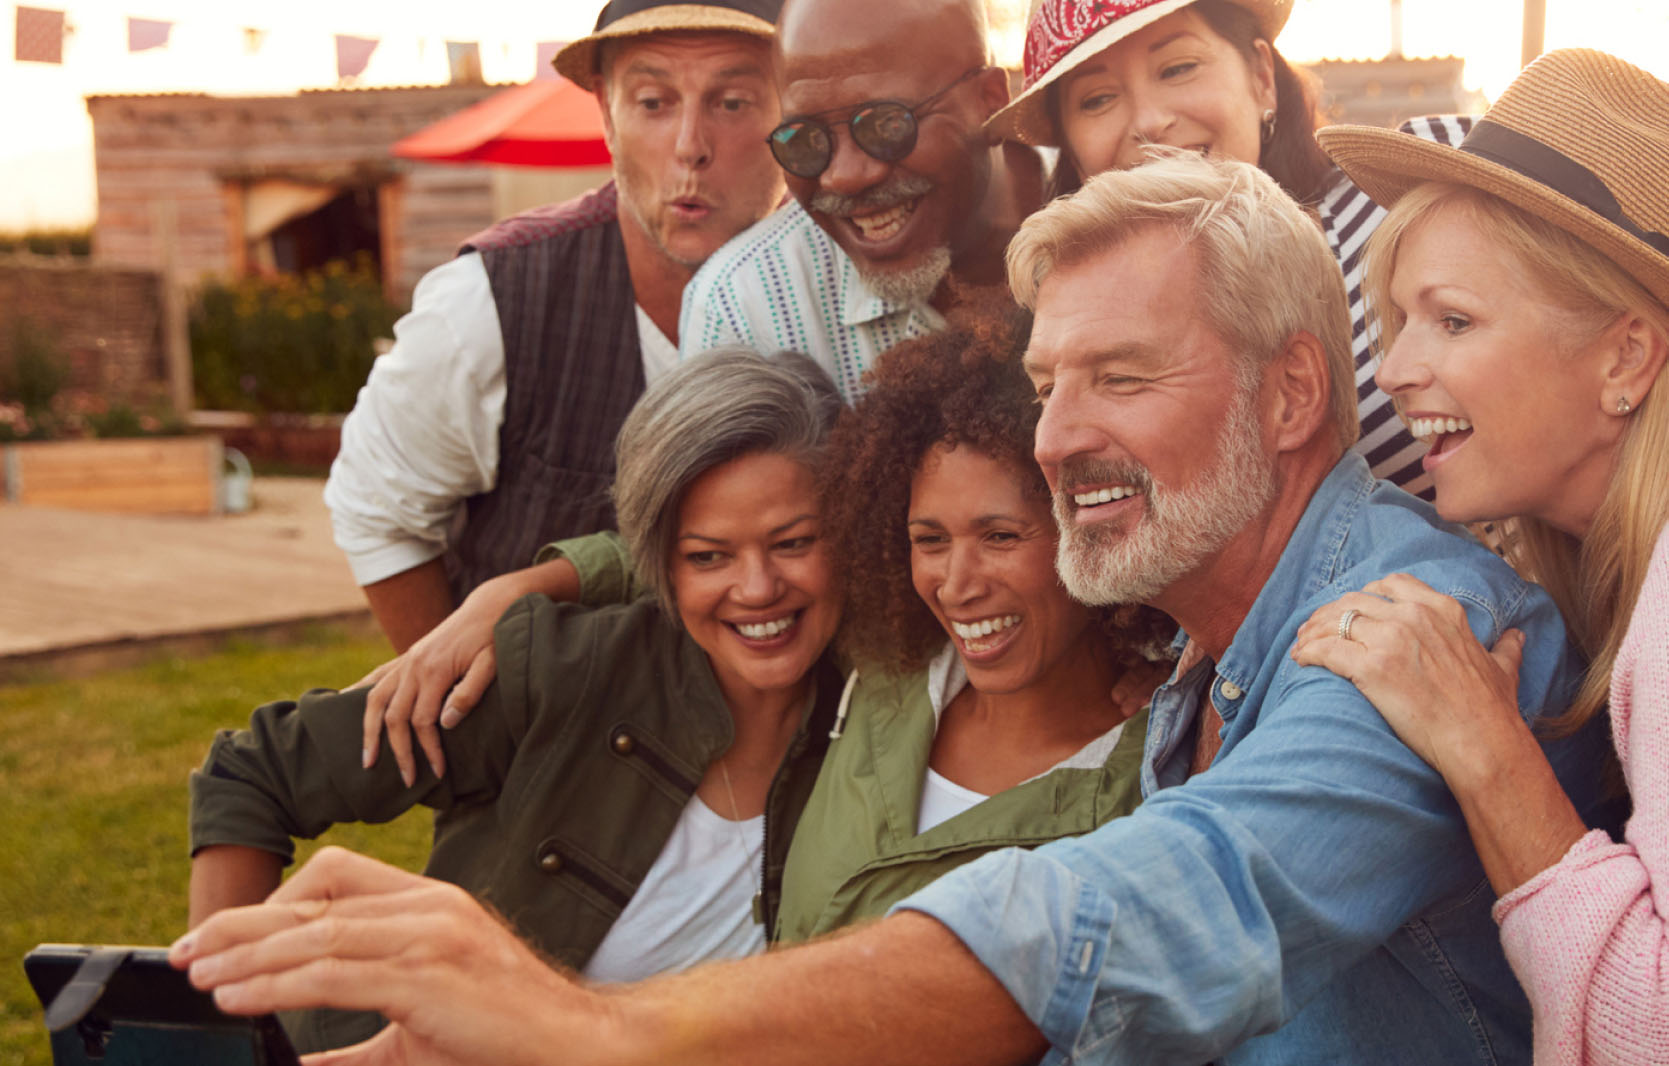 Group of people smiling and taking a selfie together outside.